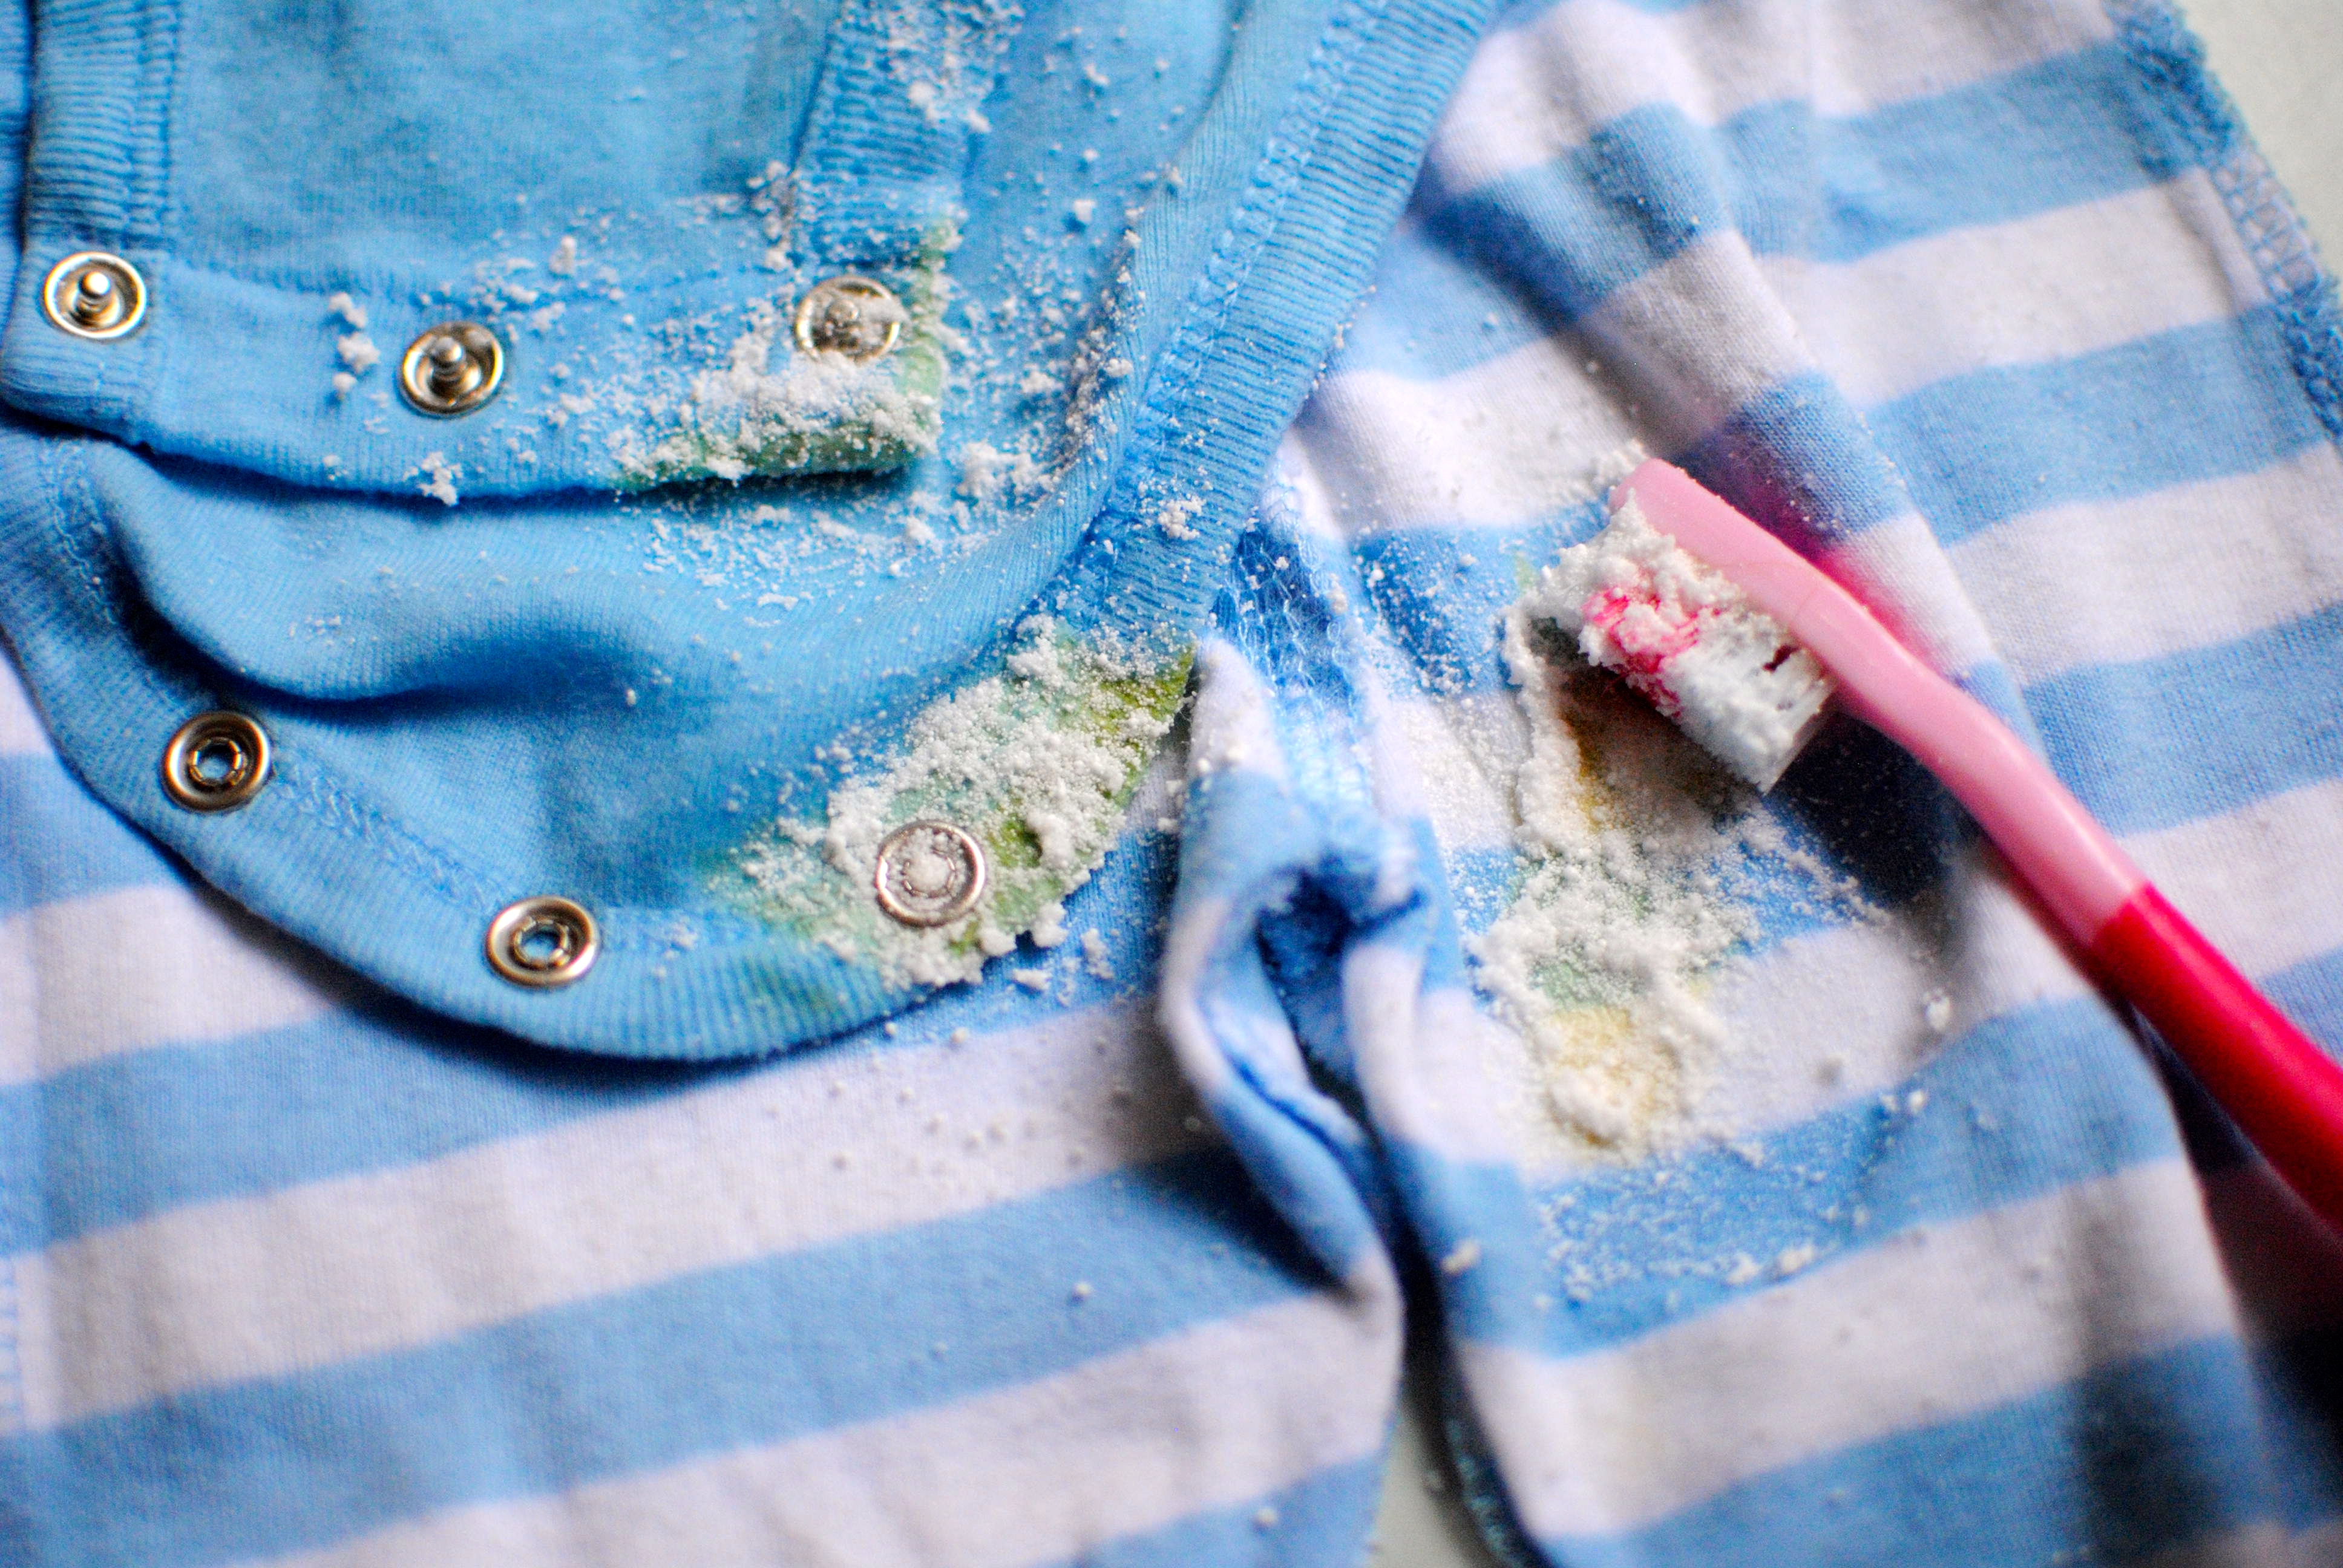 How to Remove Yellow Stains From Baby Clothing